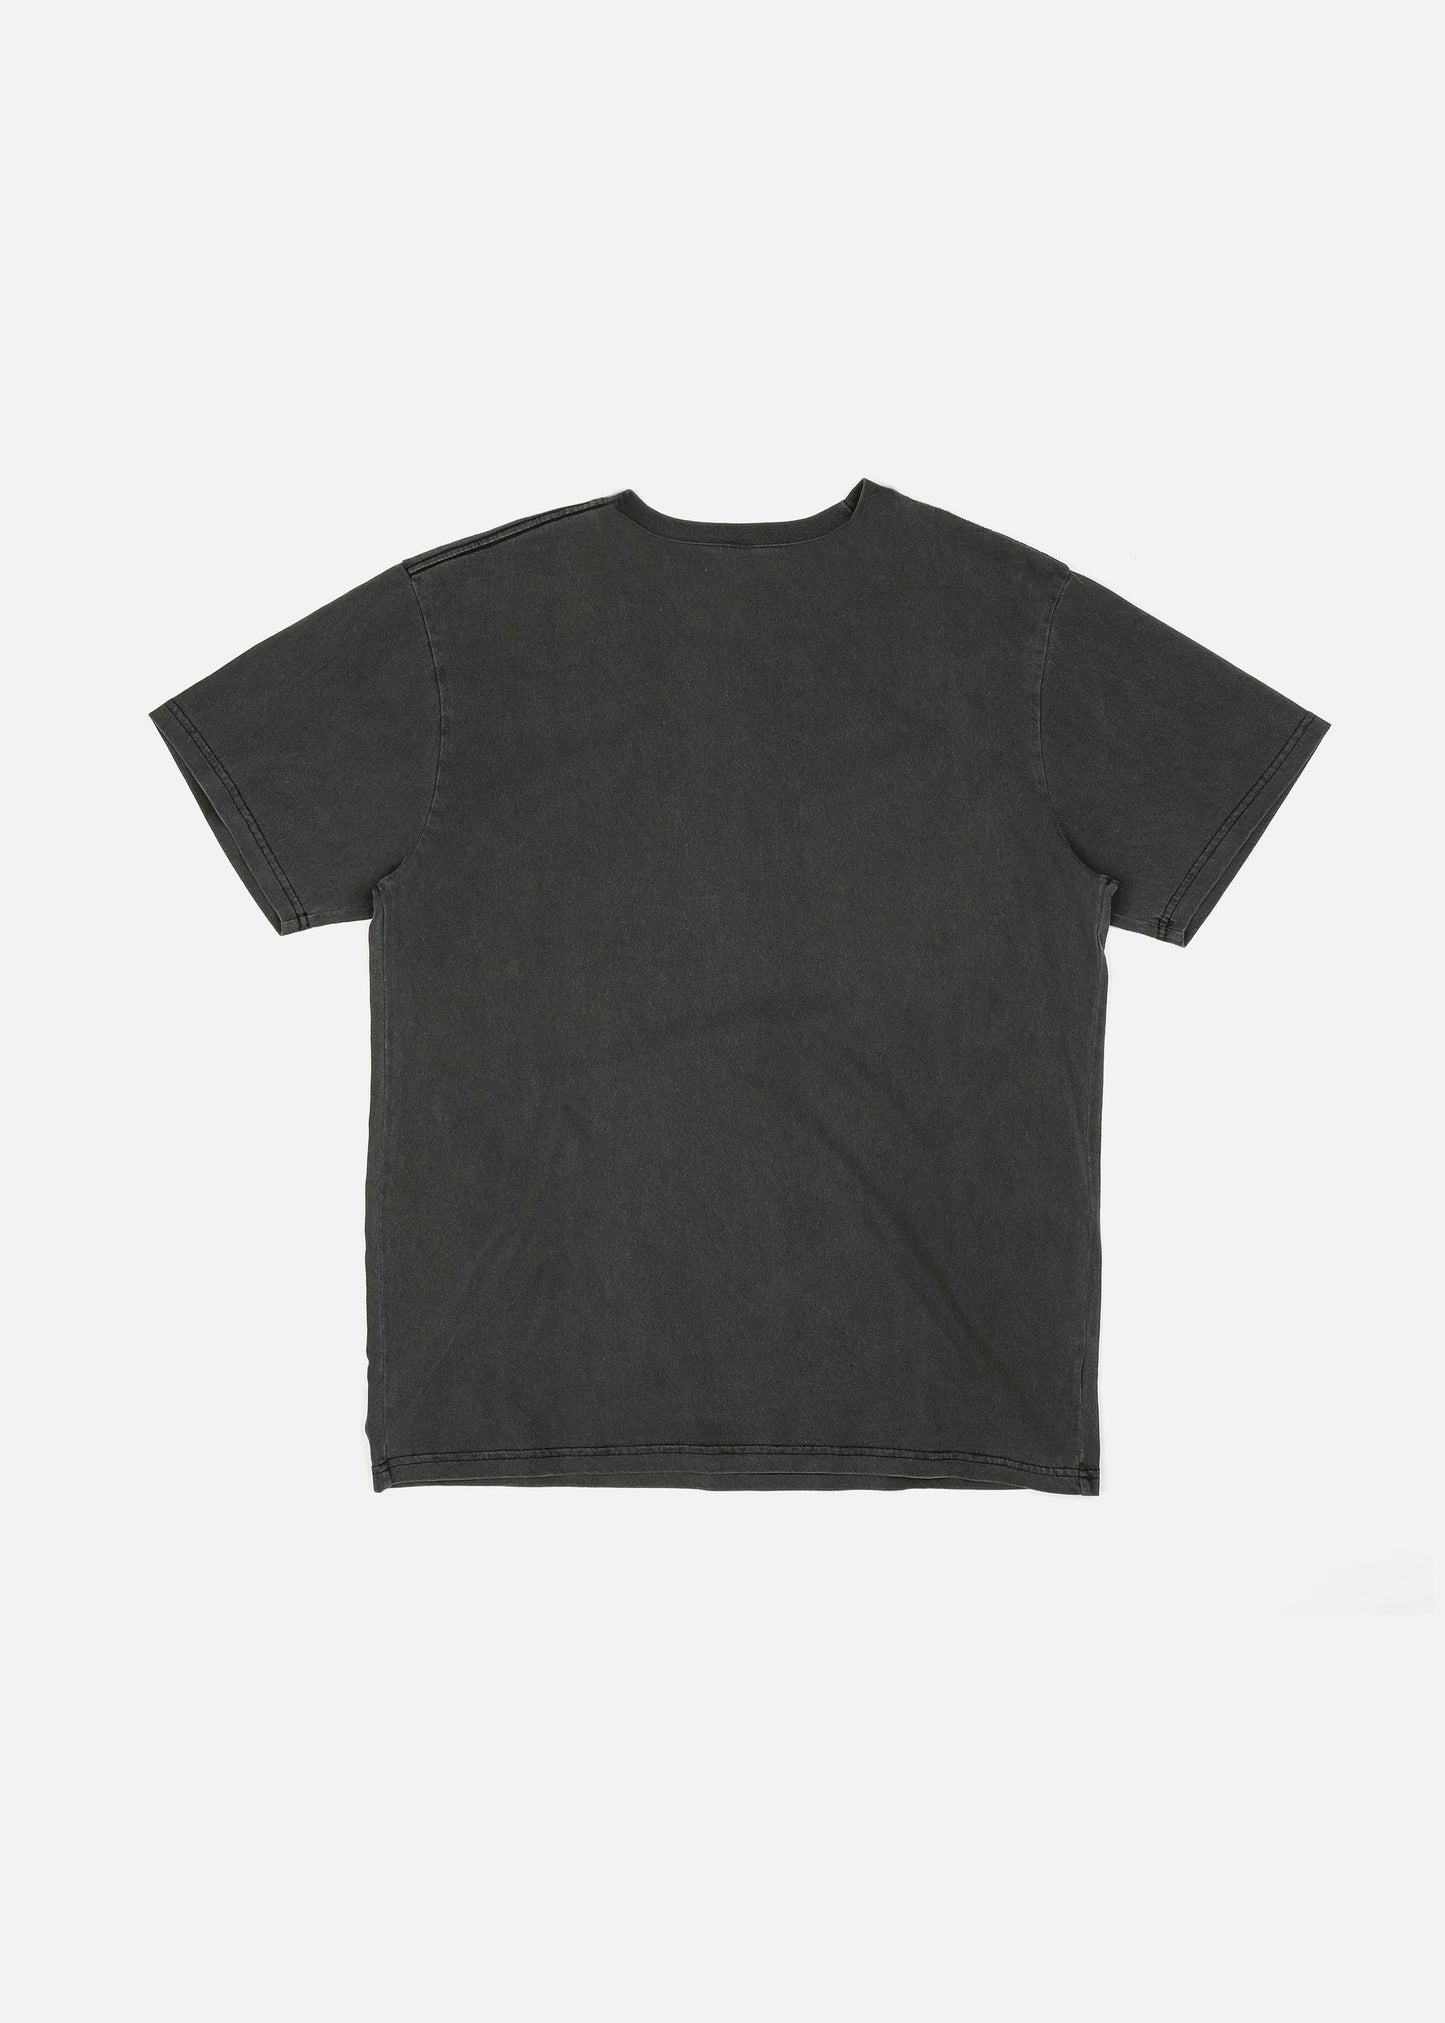 CAUSE & EFFECT T-SHIRT : WASHED BLACK